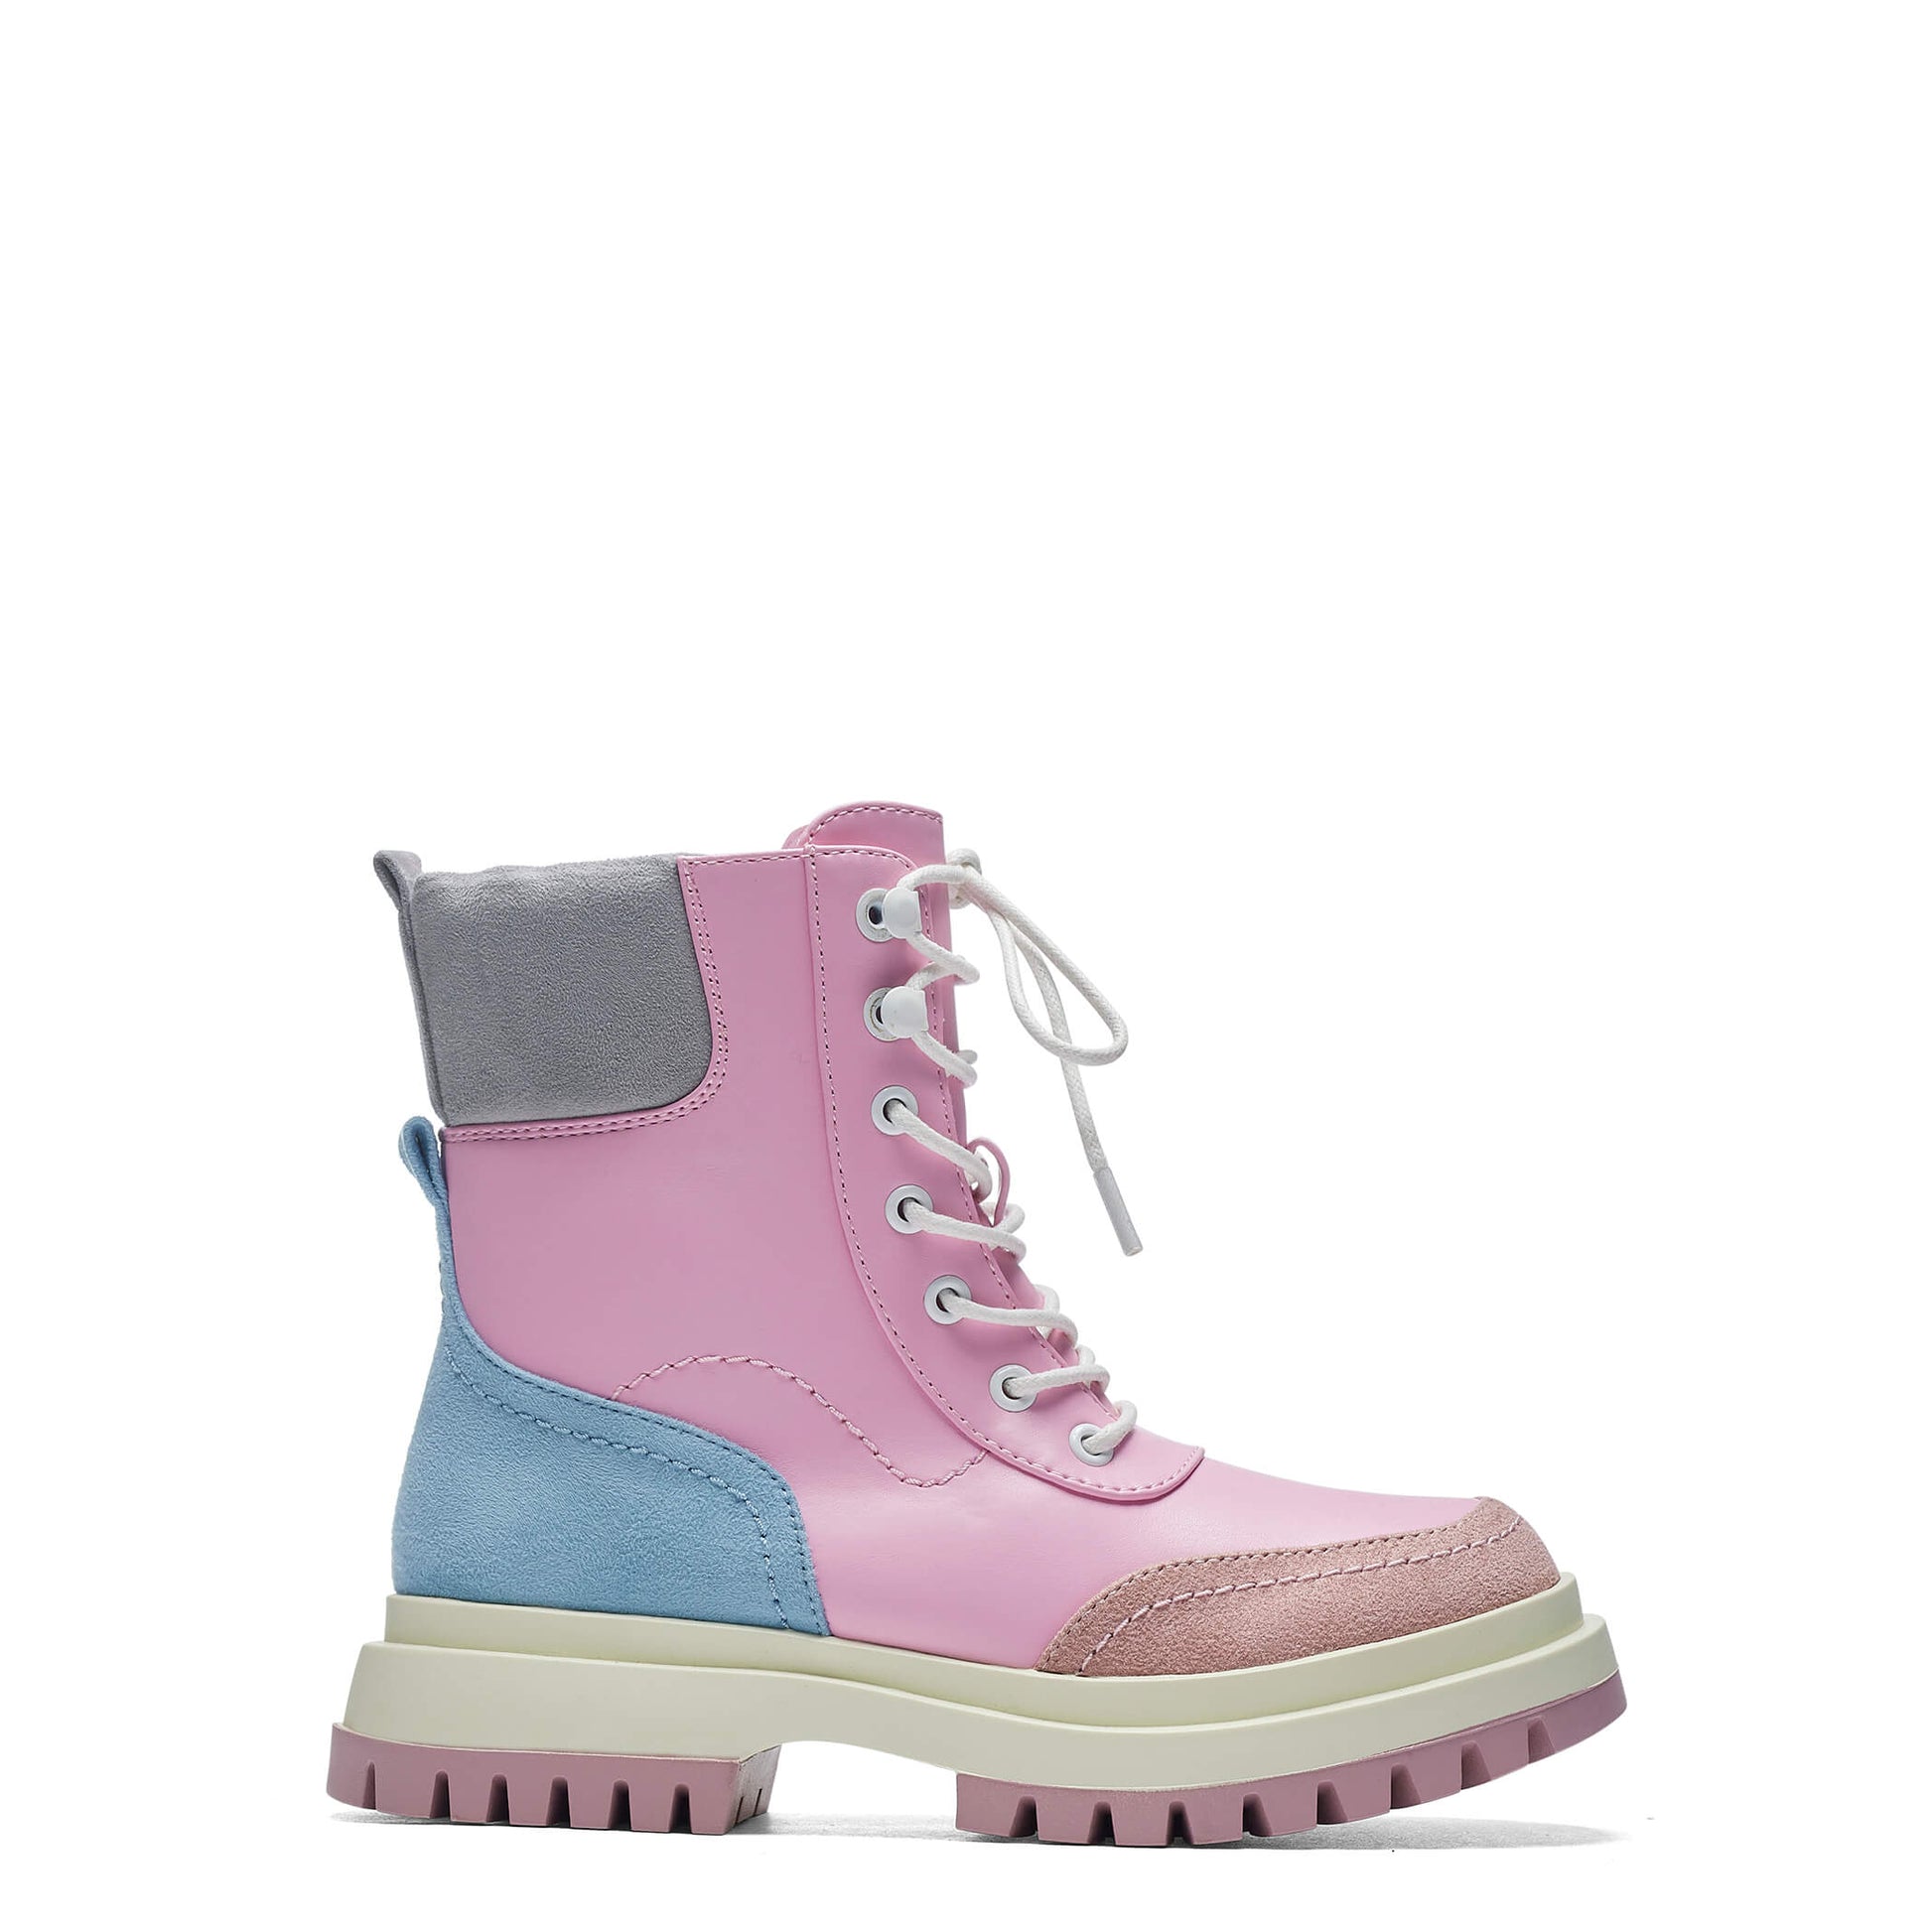 Lil’ Hydra Kawaii Boots - Ankle Boots - KOI Footwear - Pink - Side View